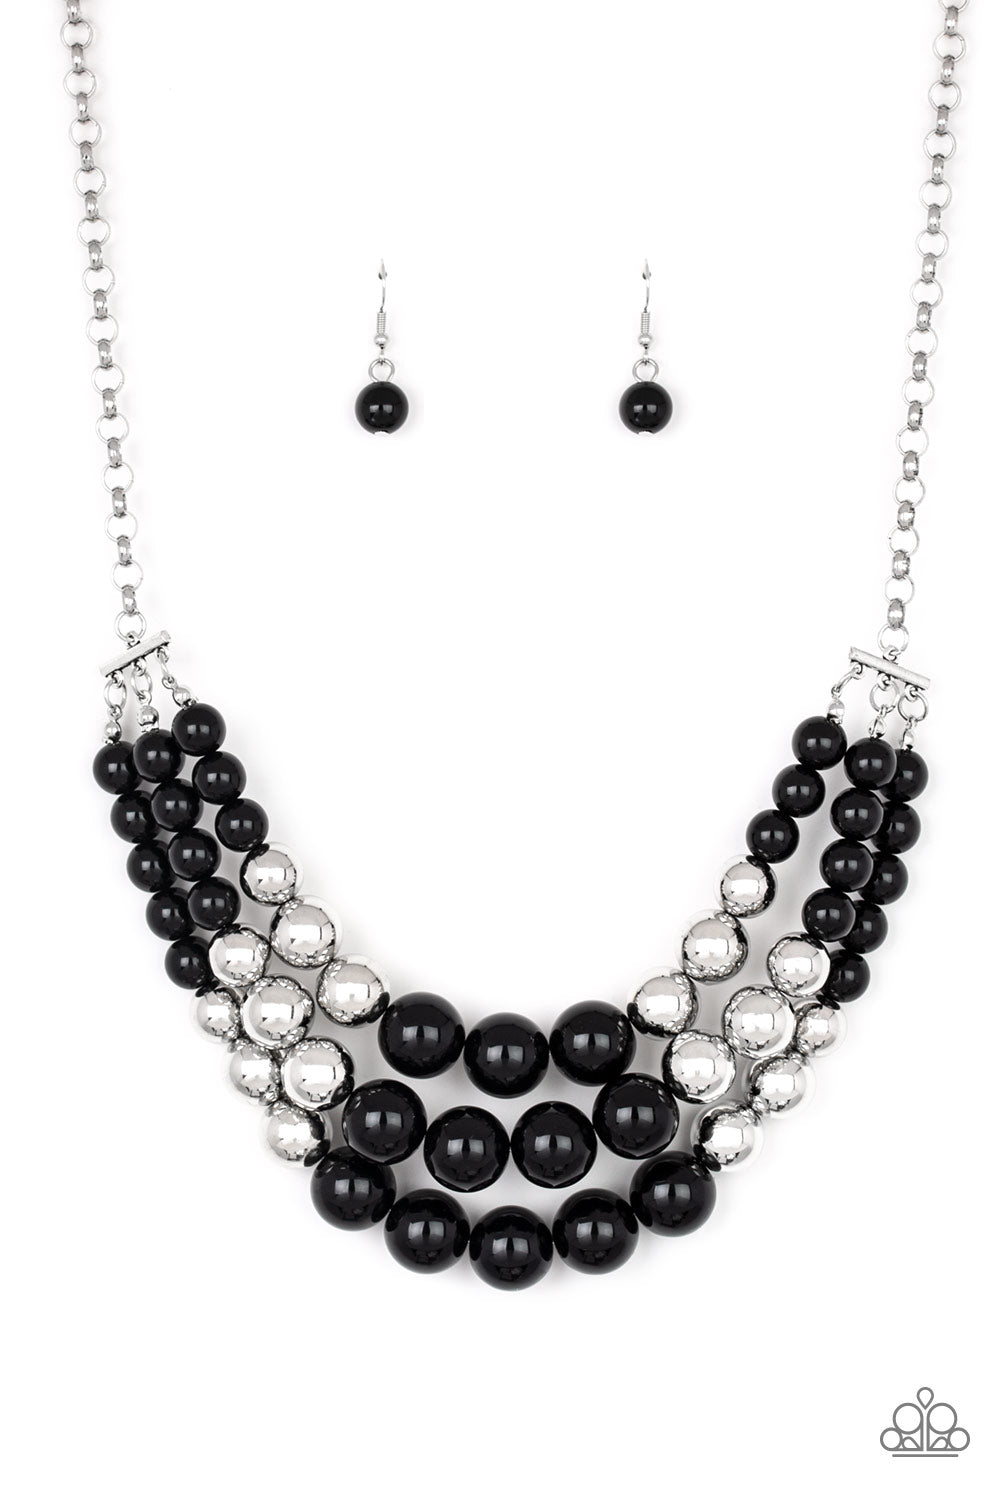 Dream Pop Black Necklace - Paparazzi Accessories  Item #P2ST-BKXX-068XX Gradually increasing in size near the center, a collection of black and silver beads layer below the collar in a statement making fashion. Features an adjustable clasp closure.  Sold as one individual necklace. Includes one pair of matching earrings.